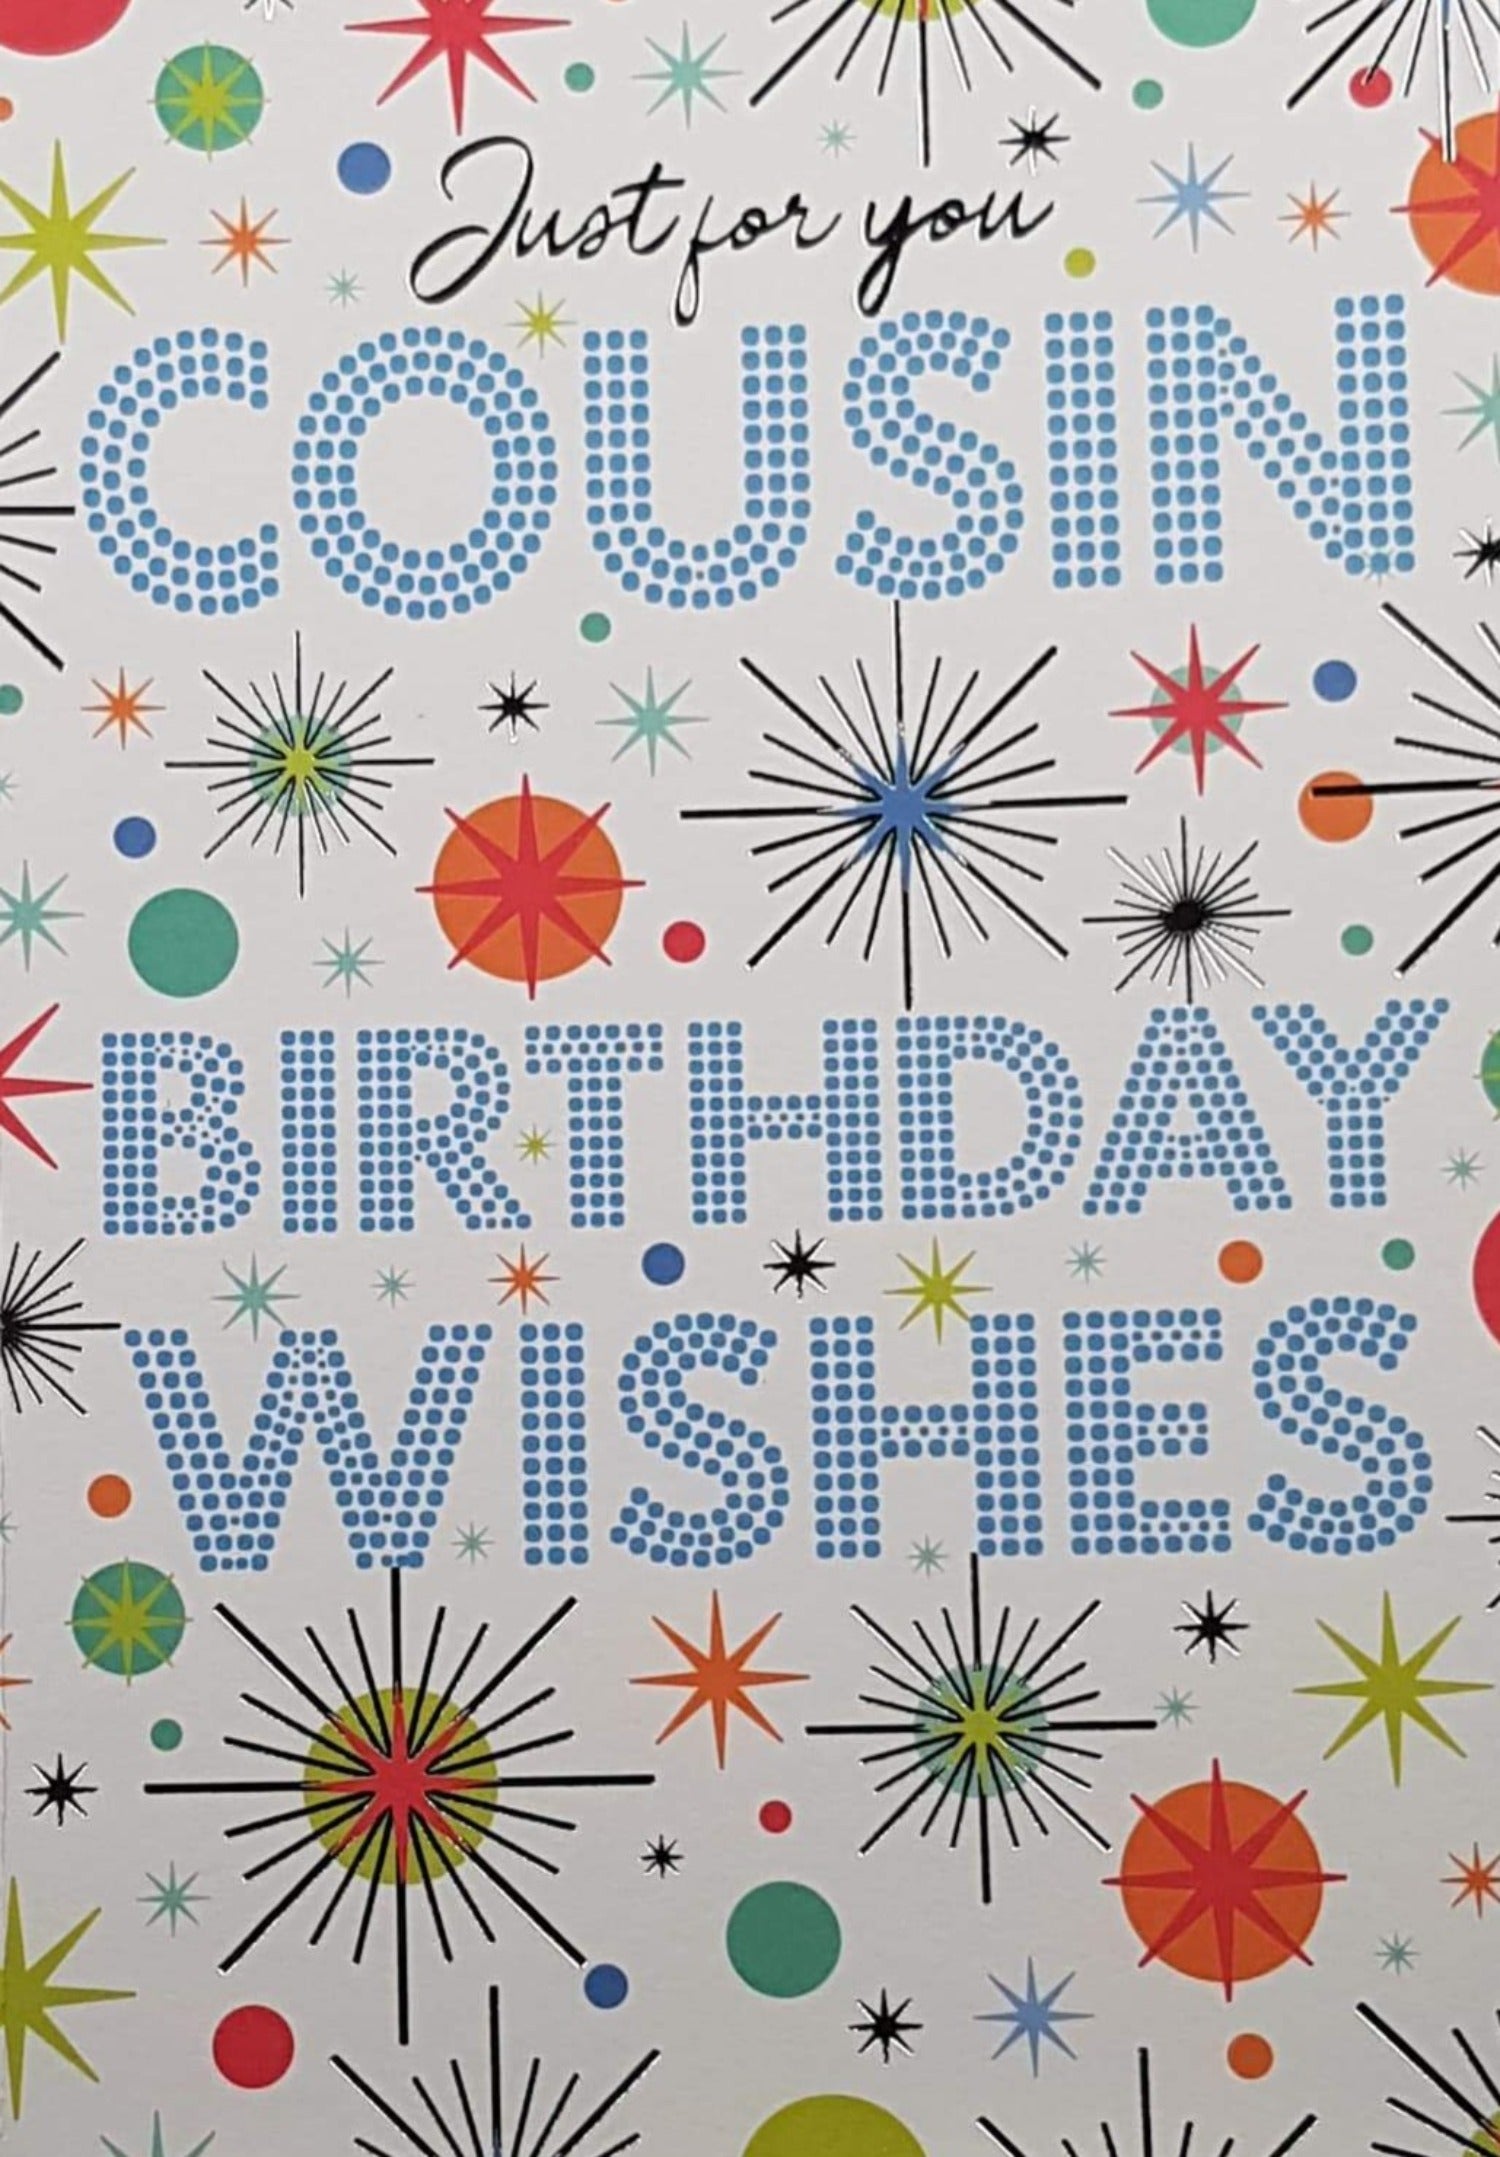 Birthday Card - Cousin / Blue Spots Shaped As A Cousin Birthday Wishes Sign